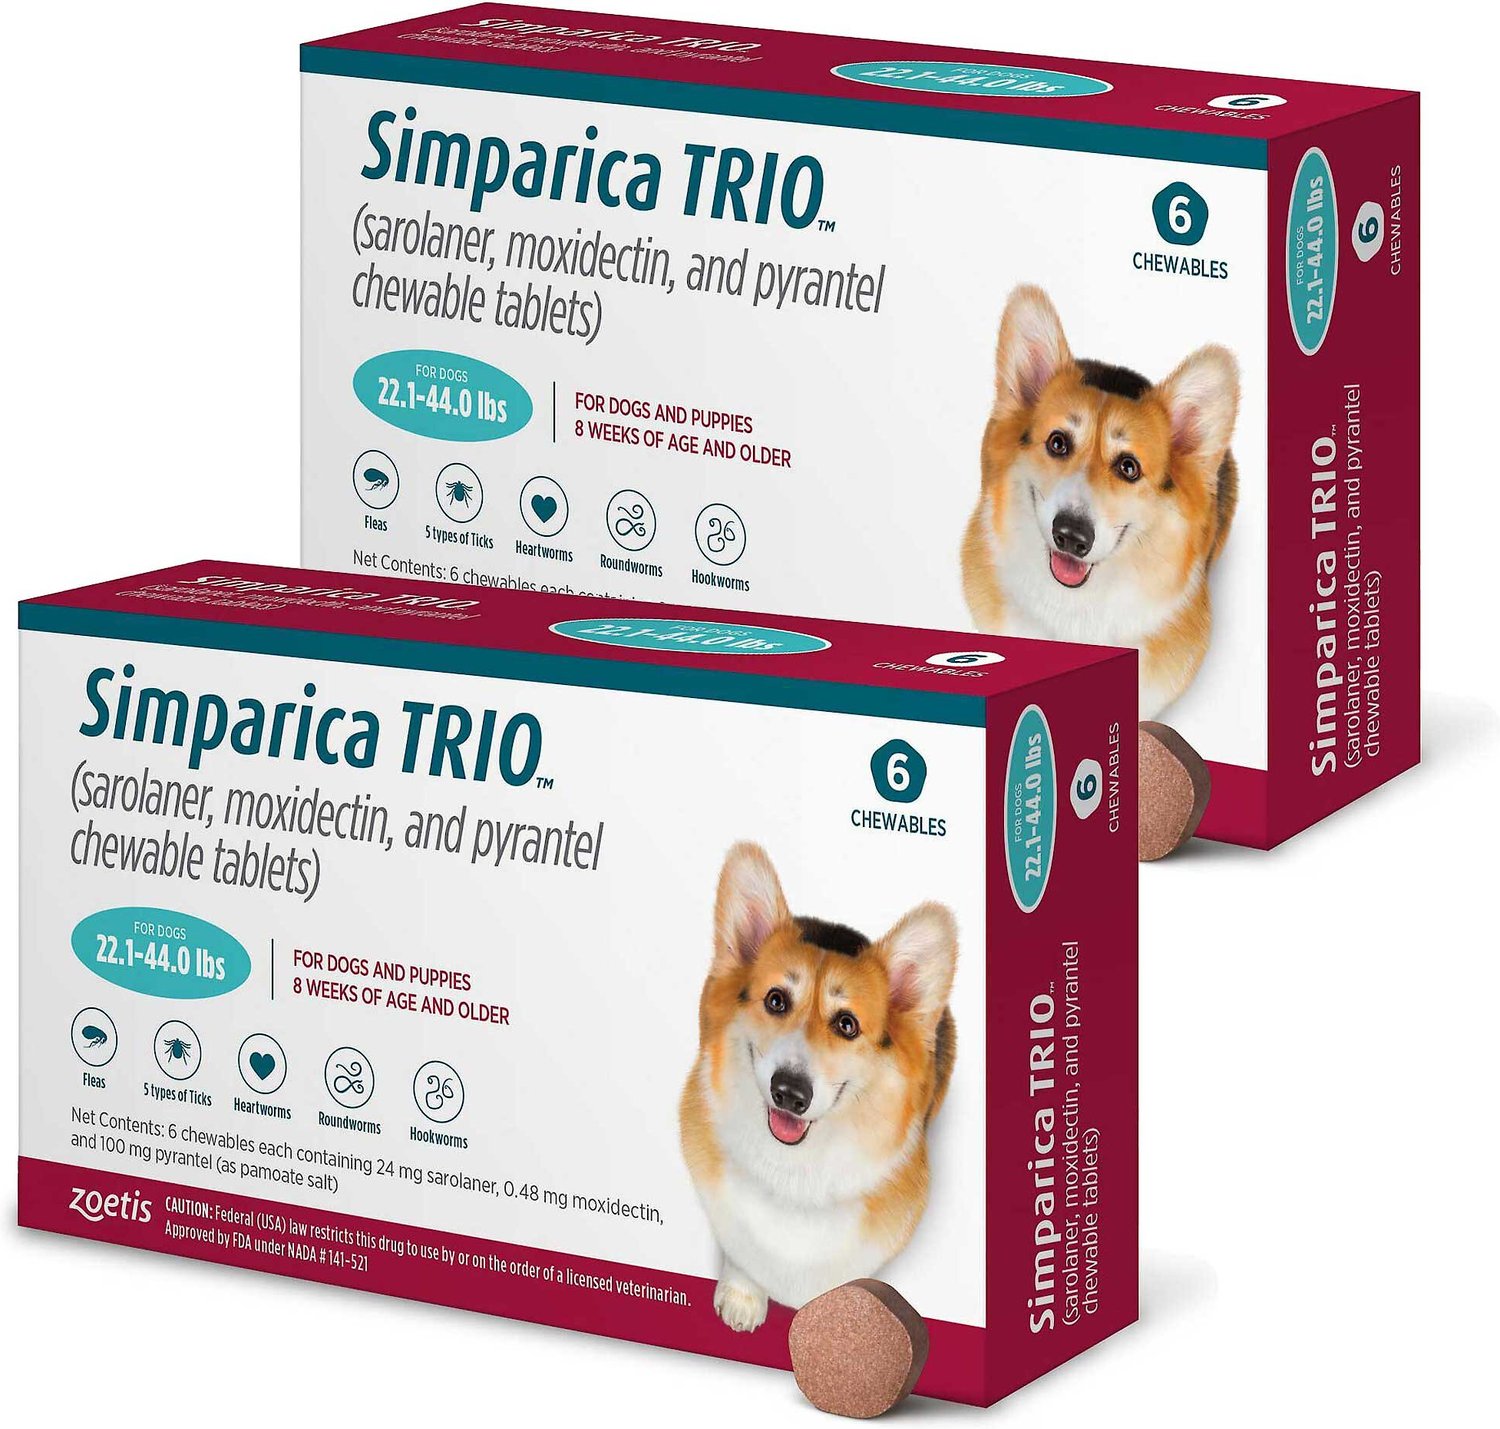 simparica-trio-chewable-tablet-for-dogs-22-1-44-0-lbs-teal-box-12